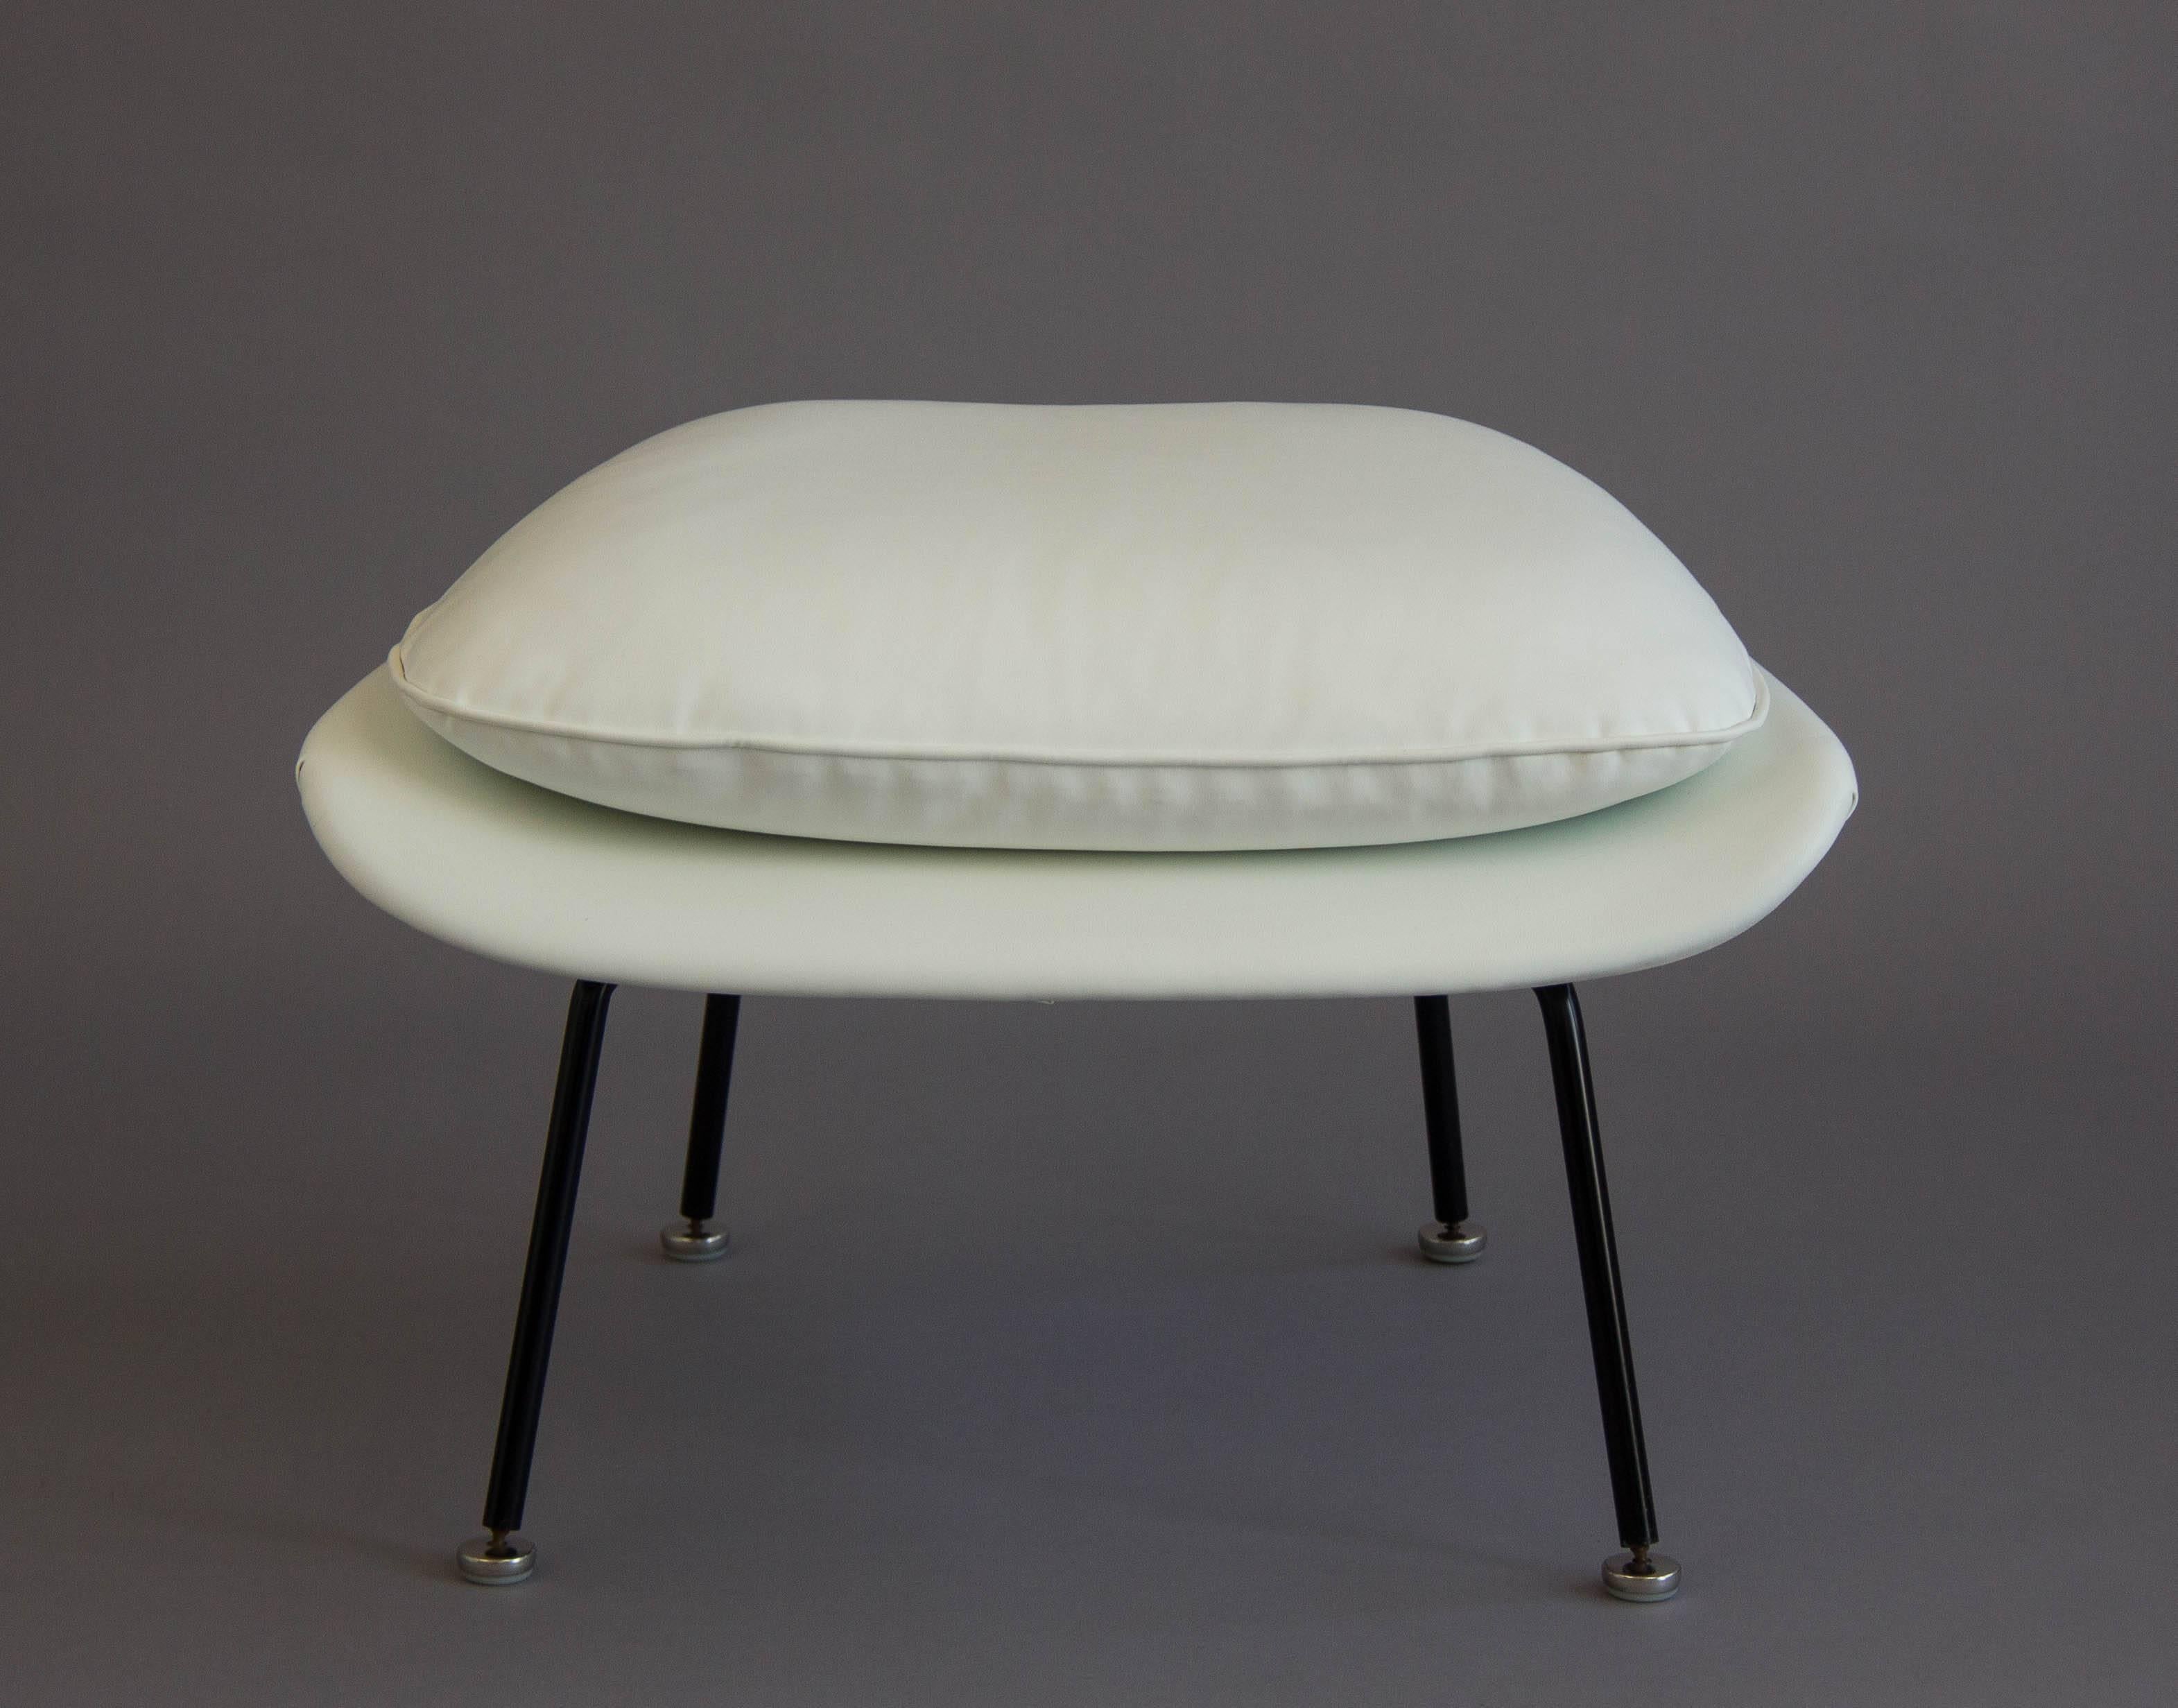 Enameled Eero Saarinen White Womb Chair and Ottoman for Knoll